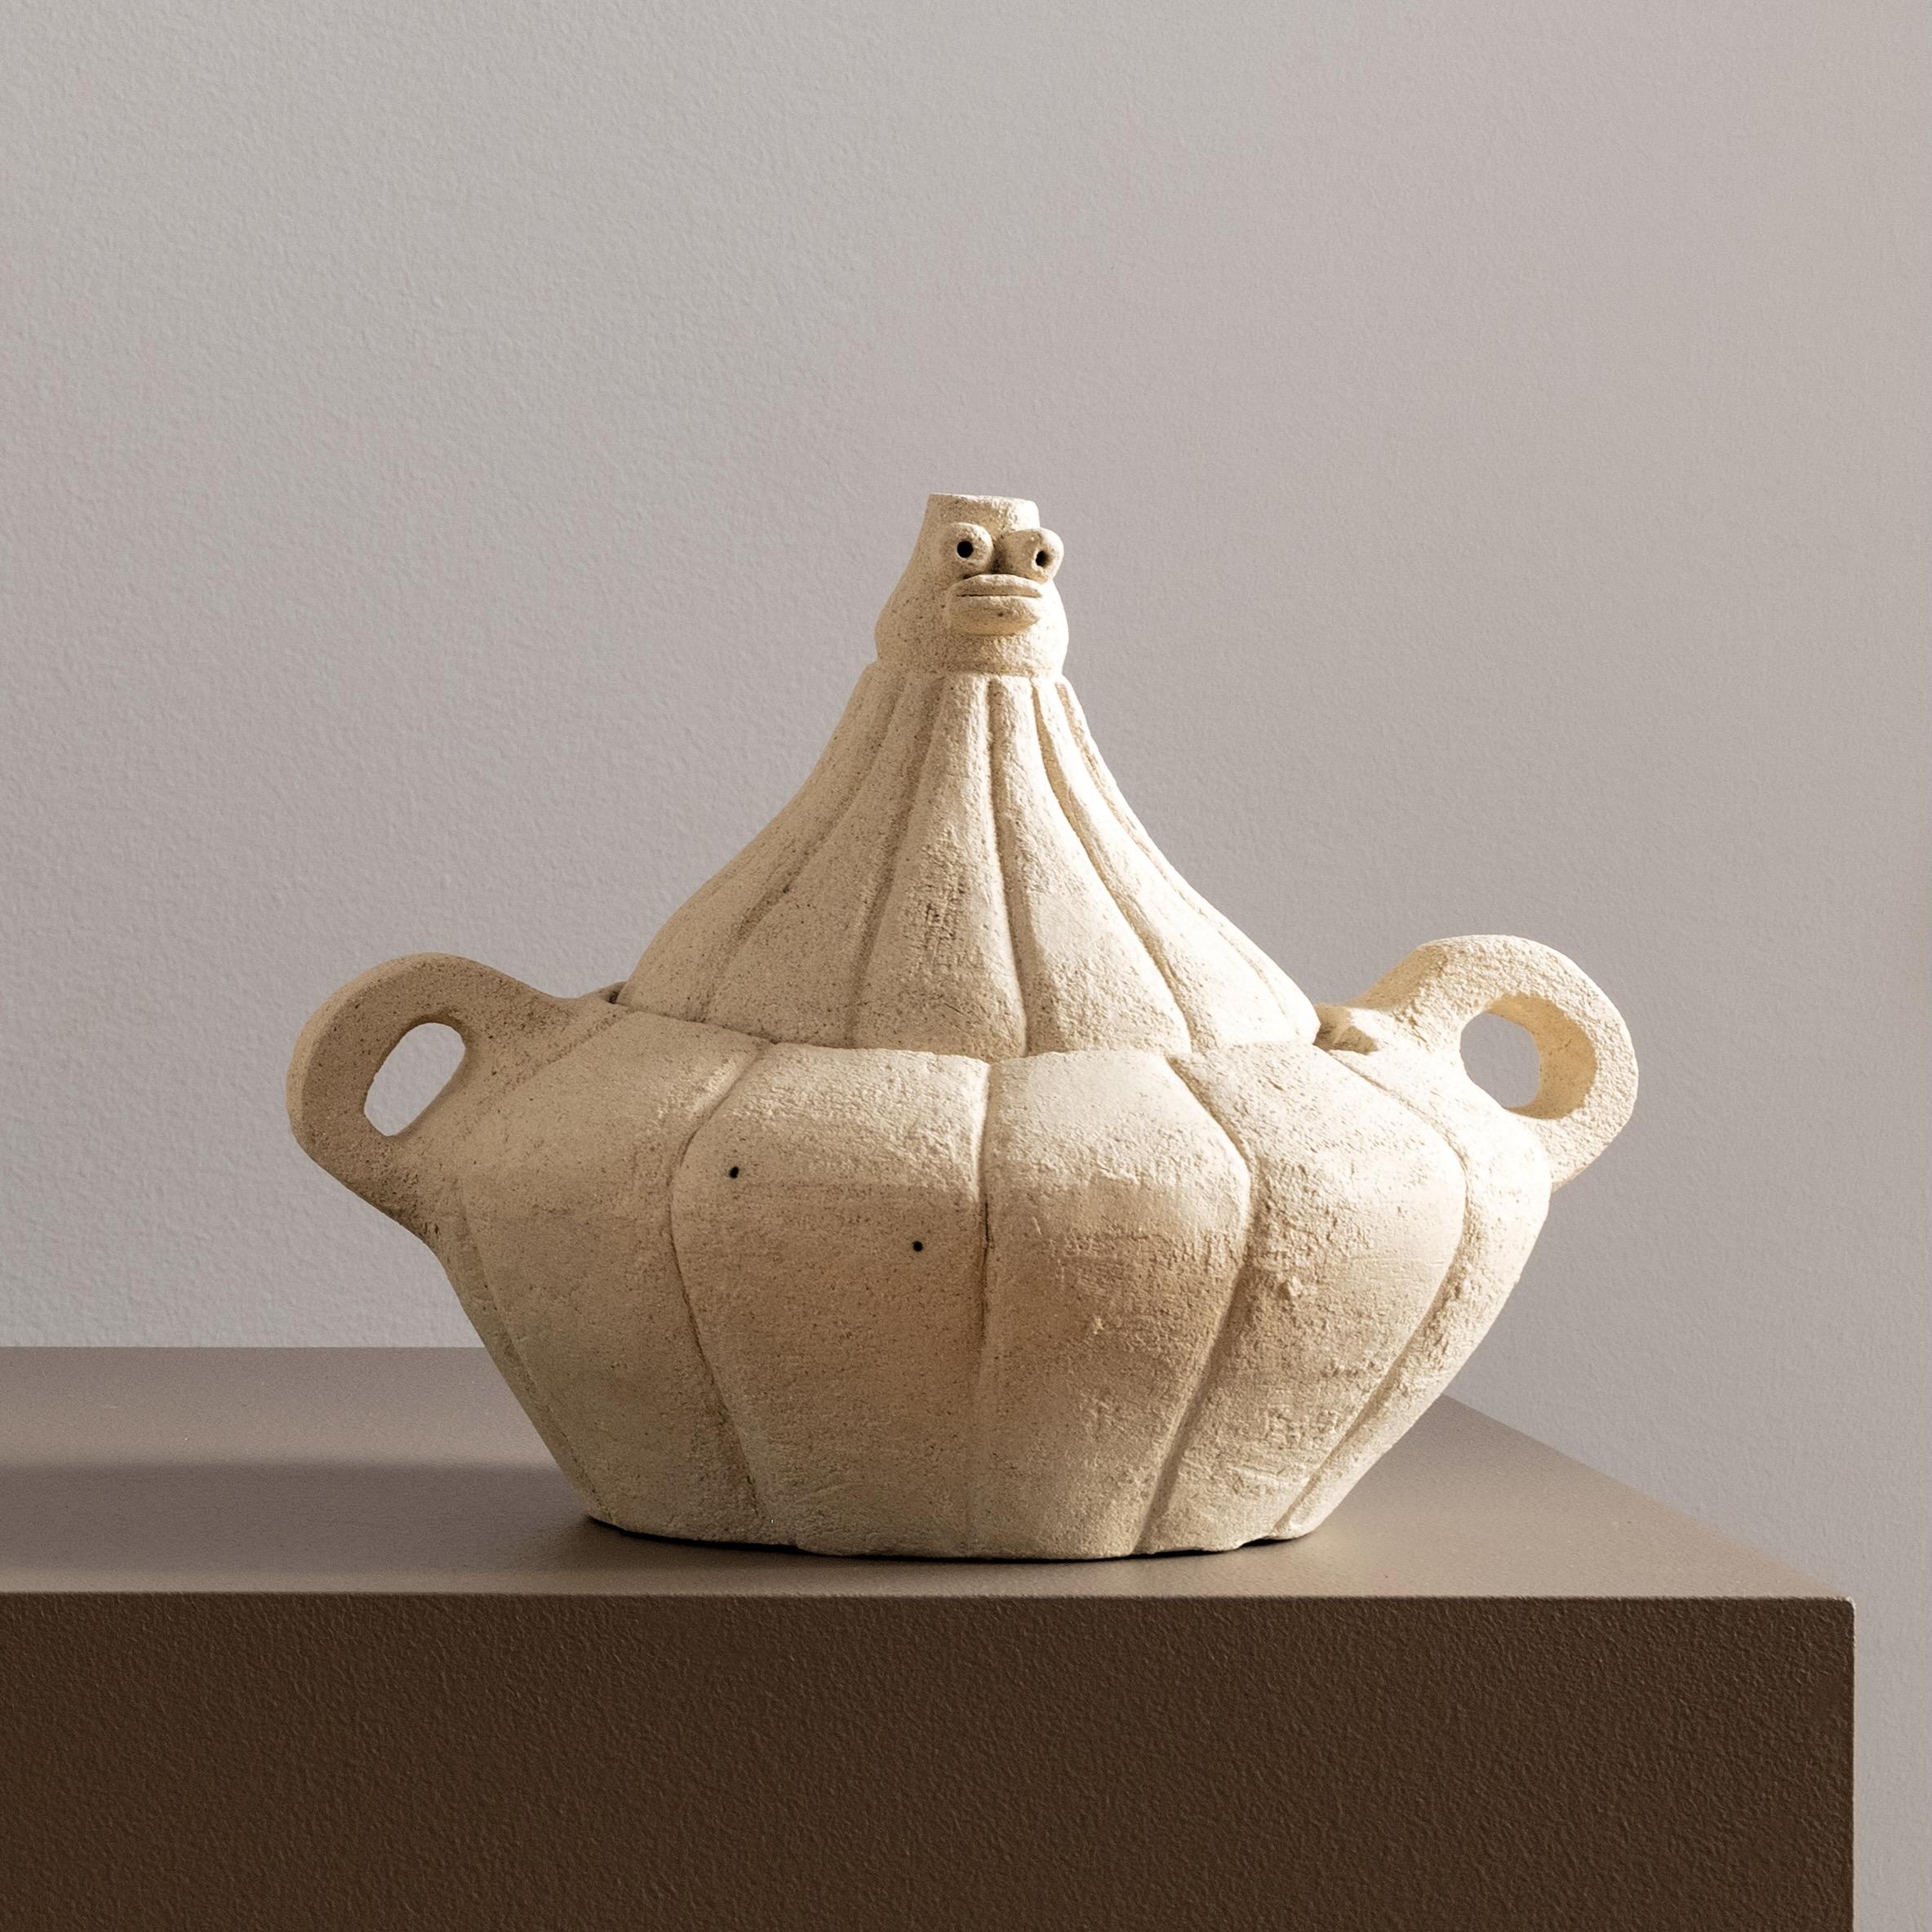 Unique, Organic Modern Figural Ceramic Dual-Handled Tureen/servingware by Meritxell Duran, handmade in Spain. 

This charming creature is crafted of refractory clay, also known as fire clay, which is valued for its ability to resist high